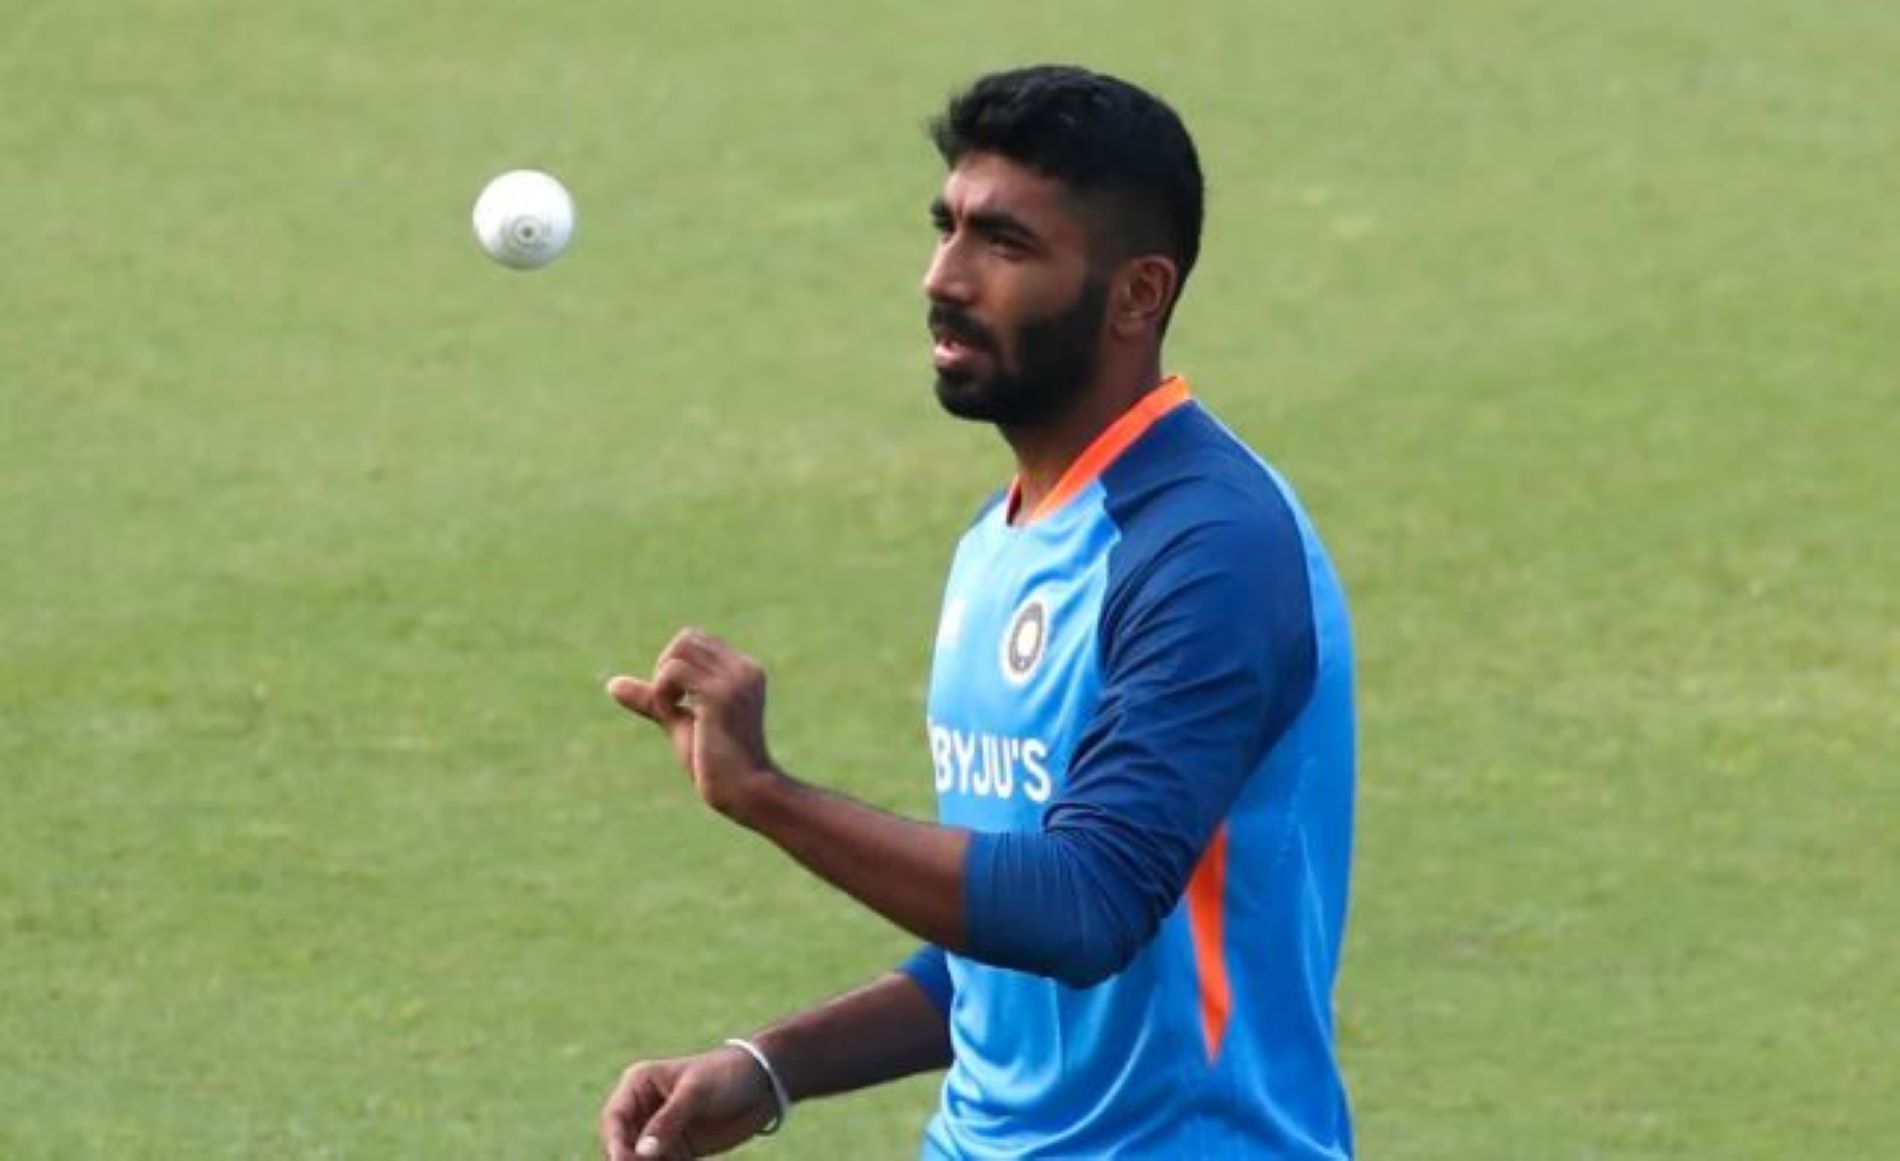 Bumrah has yet to bowl in ODIs since his return from injury.